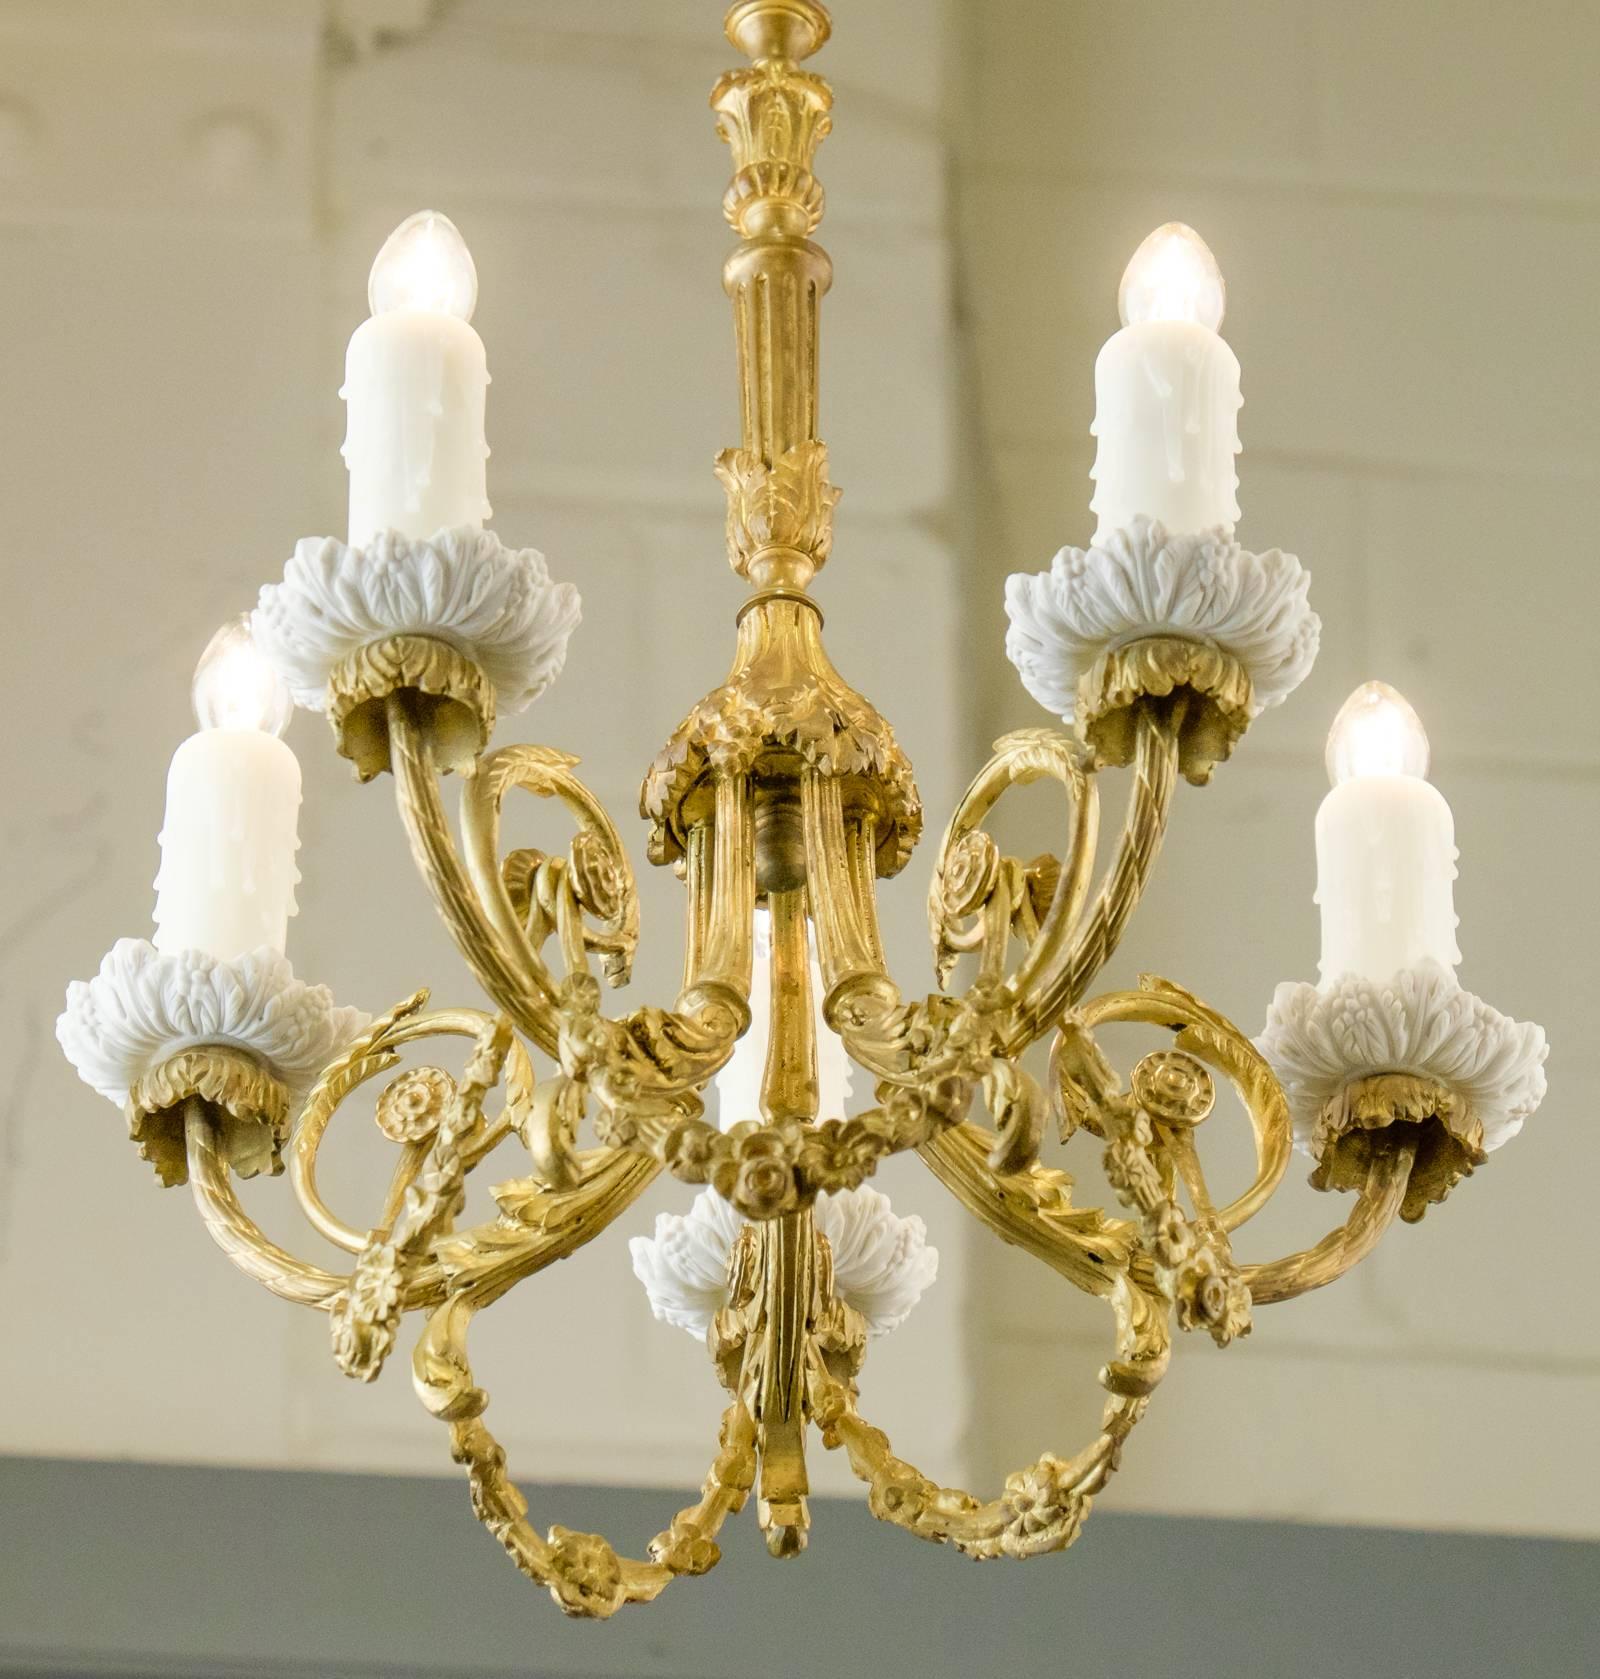 Gilt French 19th Century Gold-Leafed Chandelier with Porcelain Bobeches